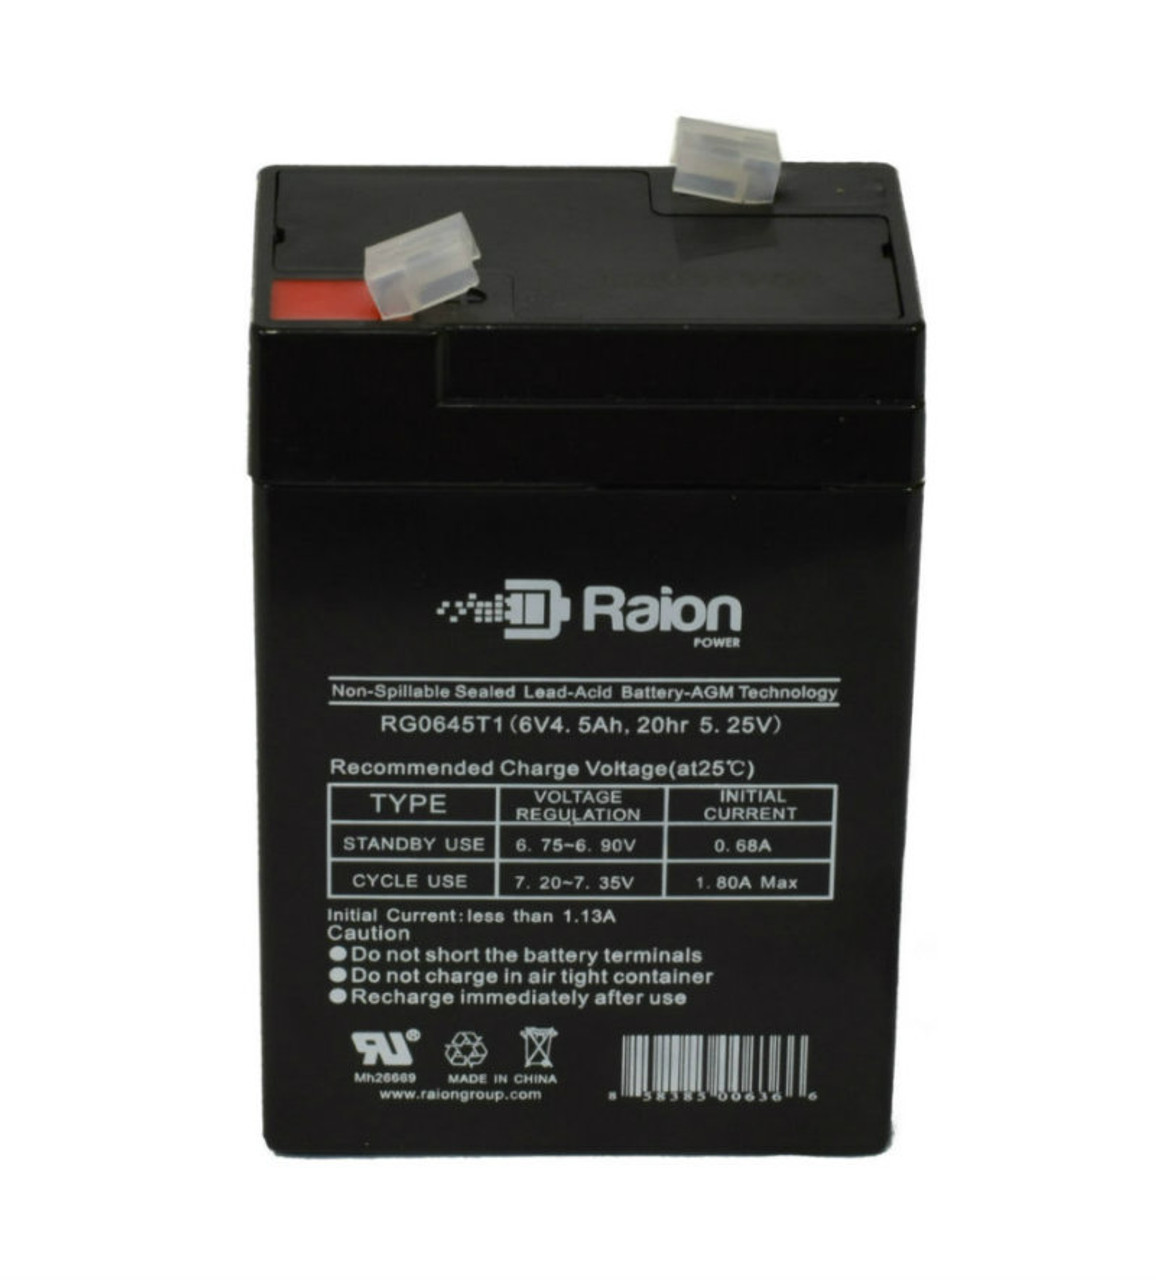 Raion Power RG0645T1 Replacement Battery Cartridge for AJC C5S